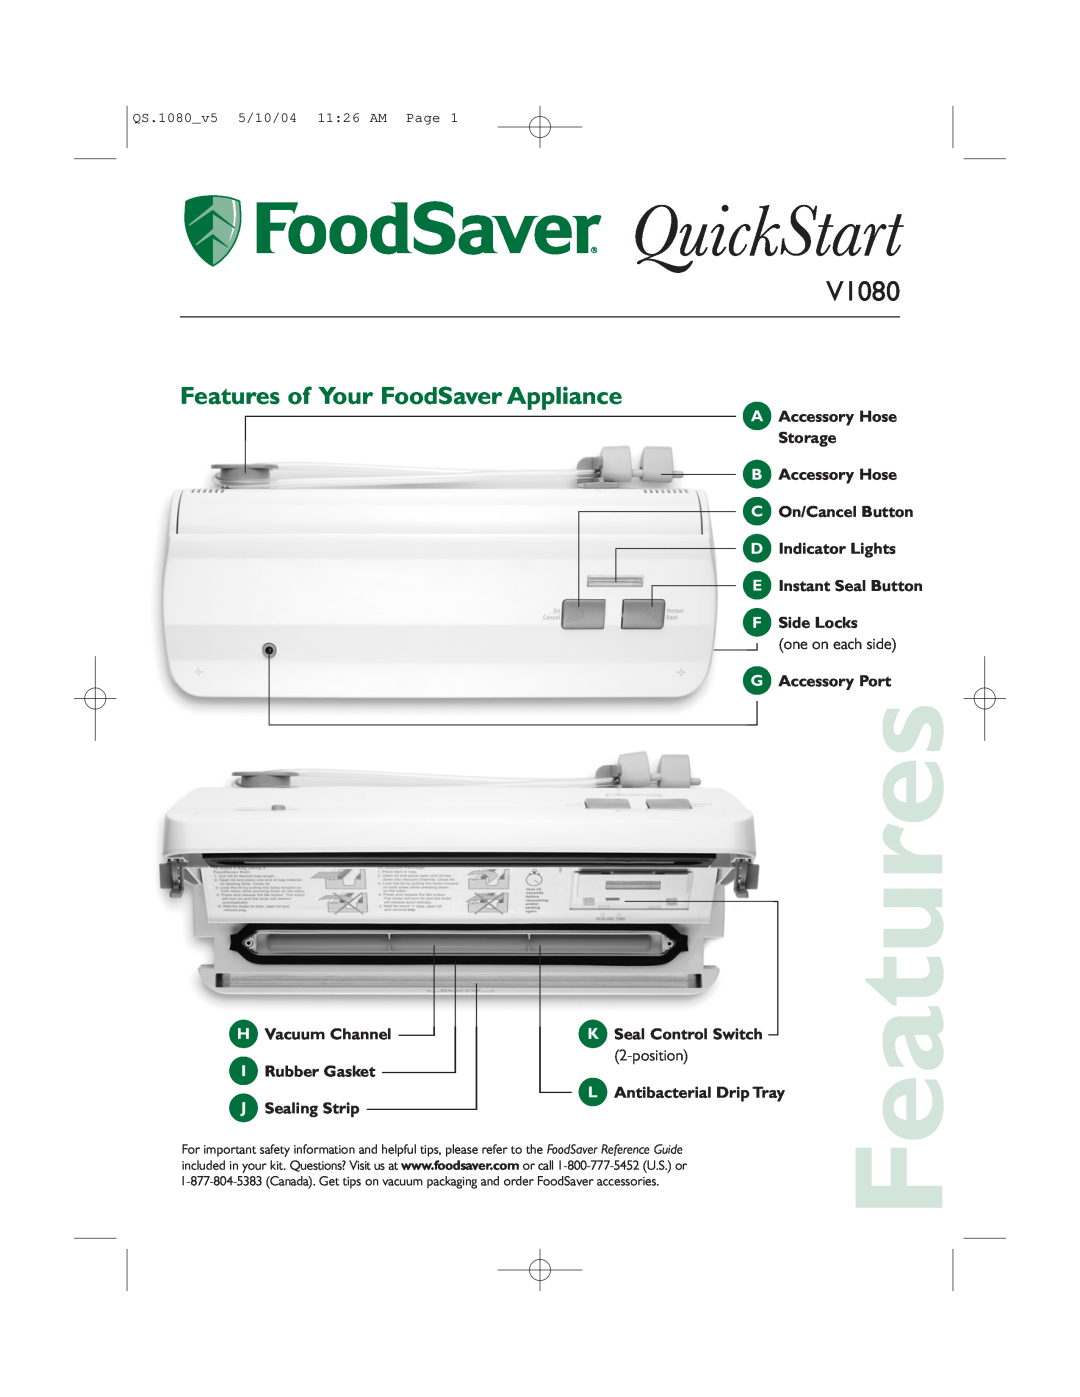 FoodSaver V1080 quick start Features of Your FoodSaver Appliance, one on each side, position, QuickStart, G Accessory Port 